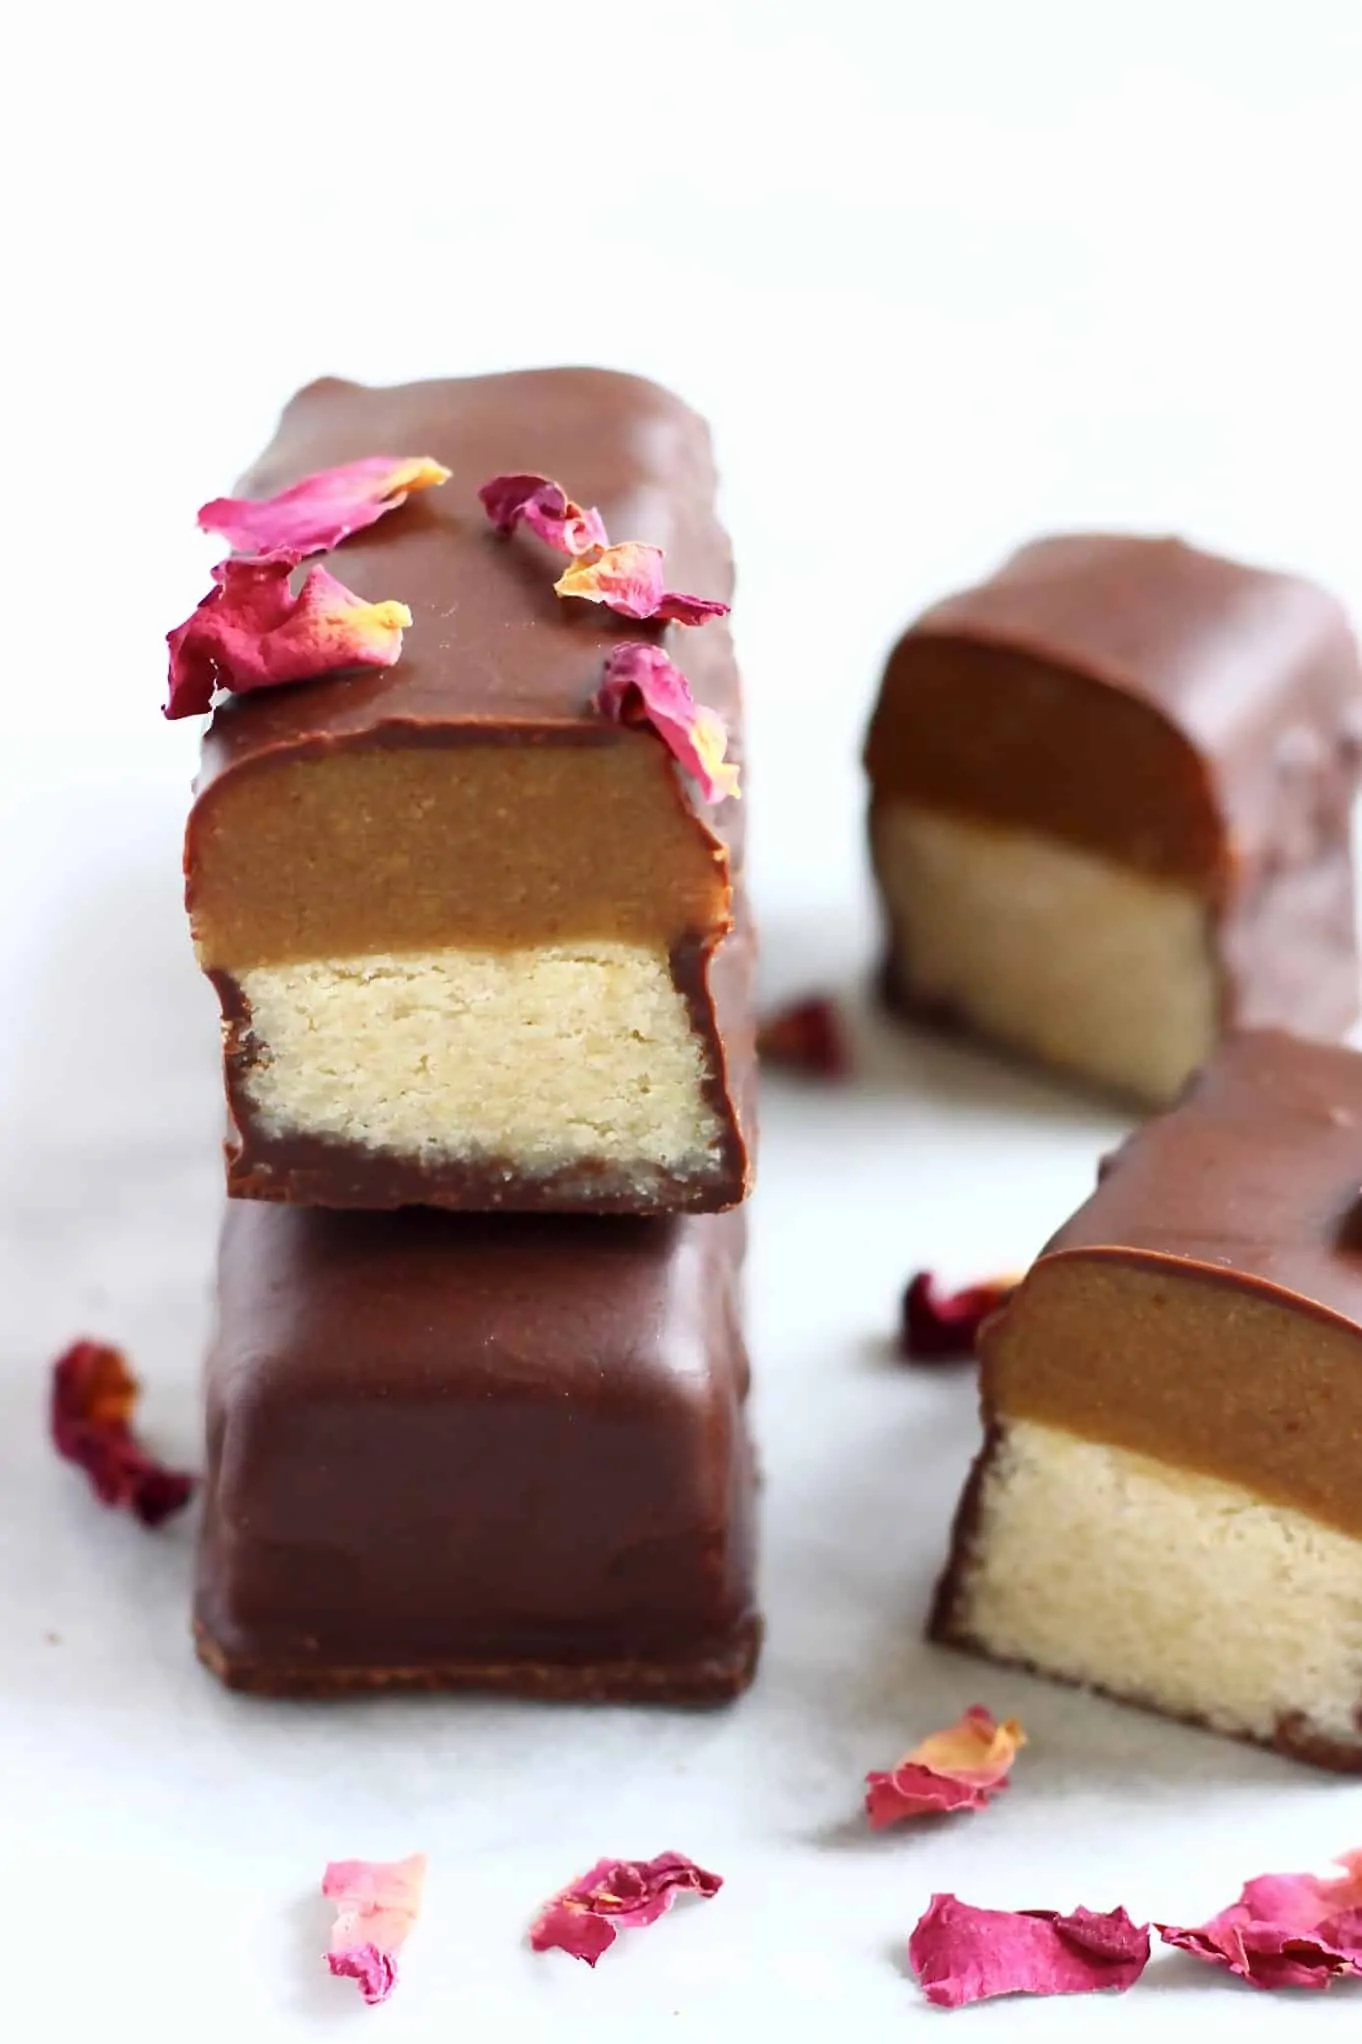 A vegan twix bar cut in half on top of a whole bar decorated with rose petals